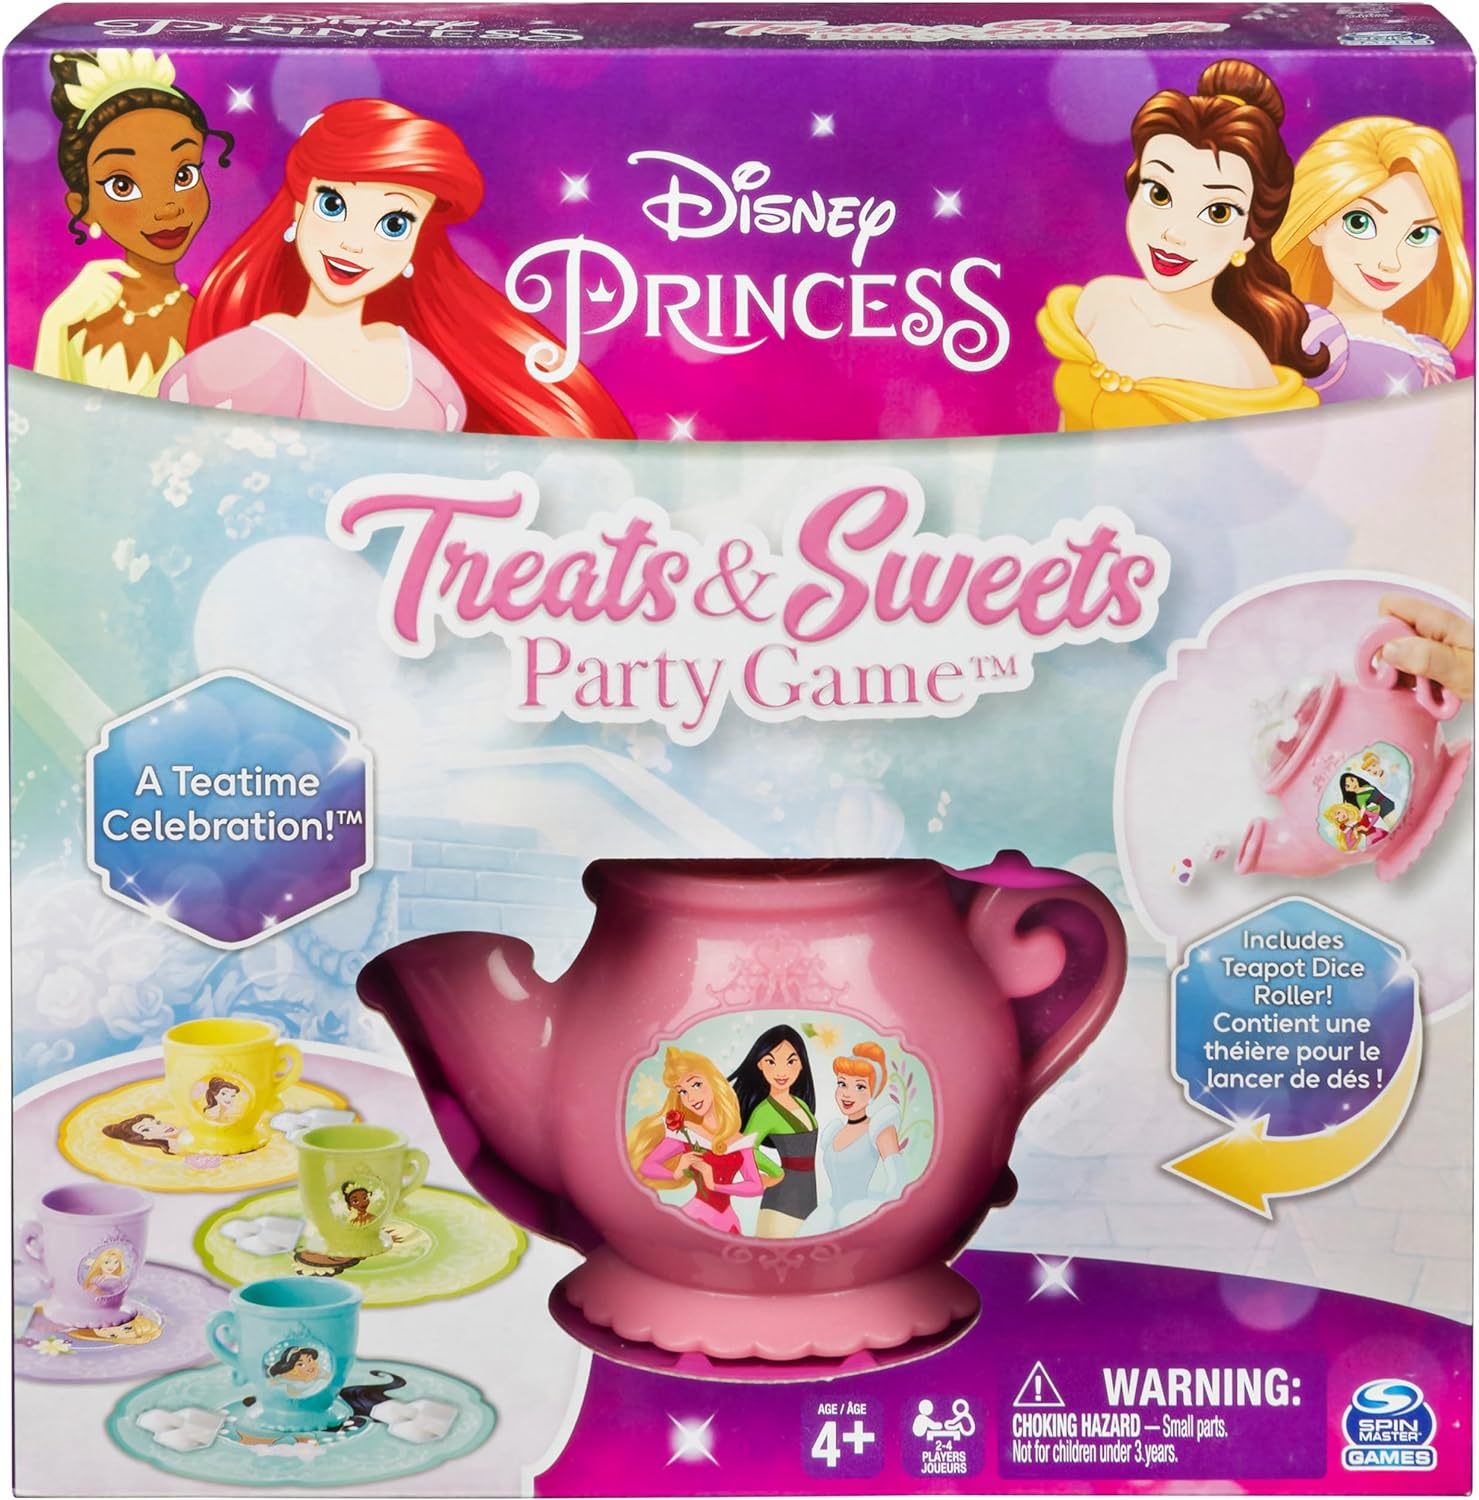 Disney Princess Treats Sweets Party Board Game for Kids and Families Ages 4 and  - $35.08